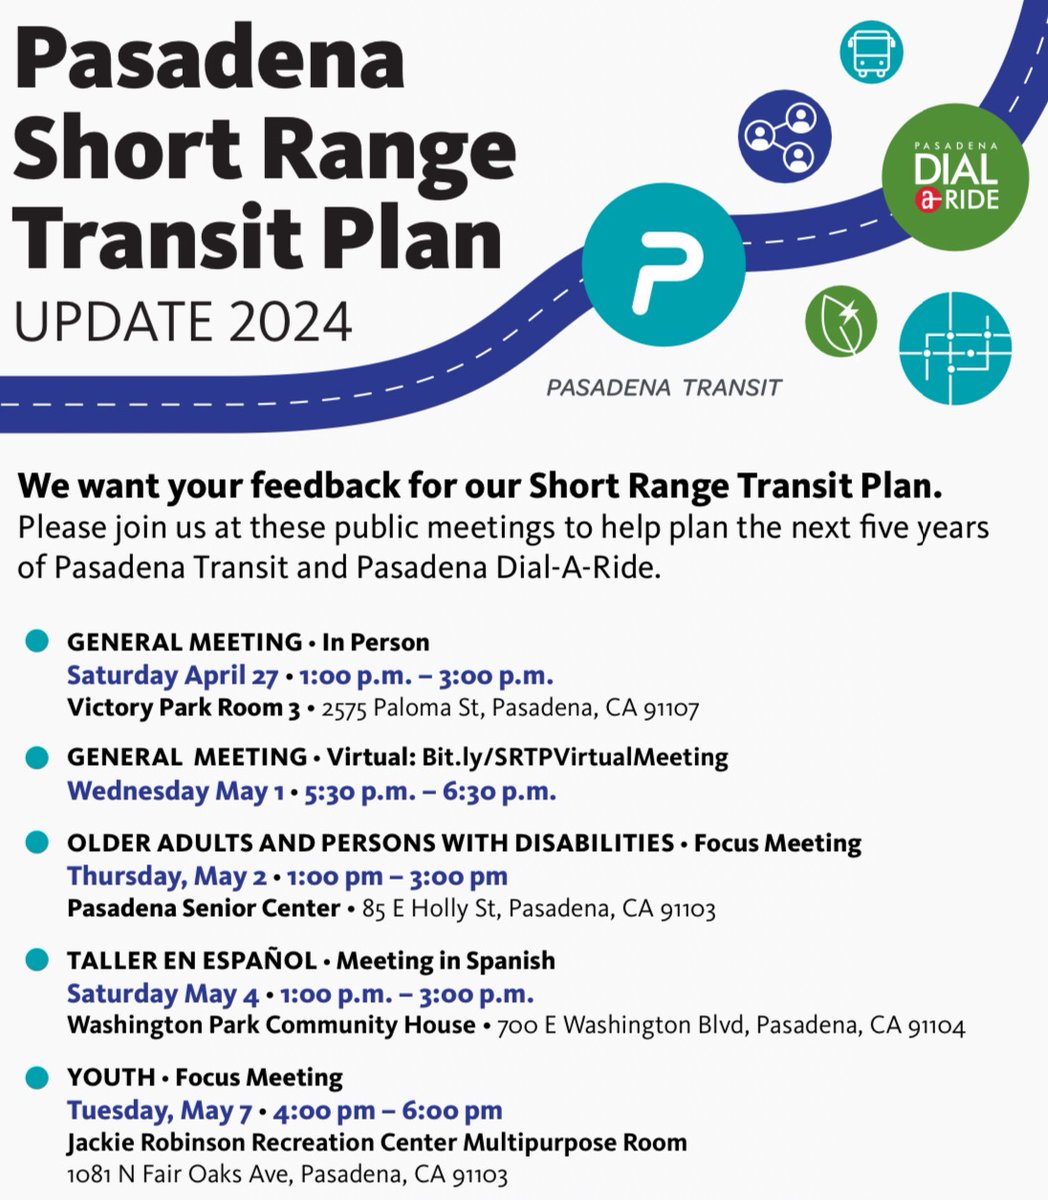 The Pasadena Department of Transportation will host a series of meetings regarding the Short Range Transit Plan update where participants can provide public feedback on public transit services. The first meeting will be held on Saturday, April 27 from 1 pm - 3 pm at Victory…